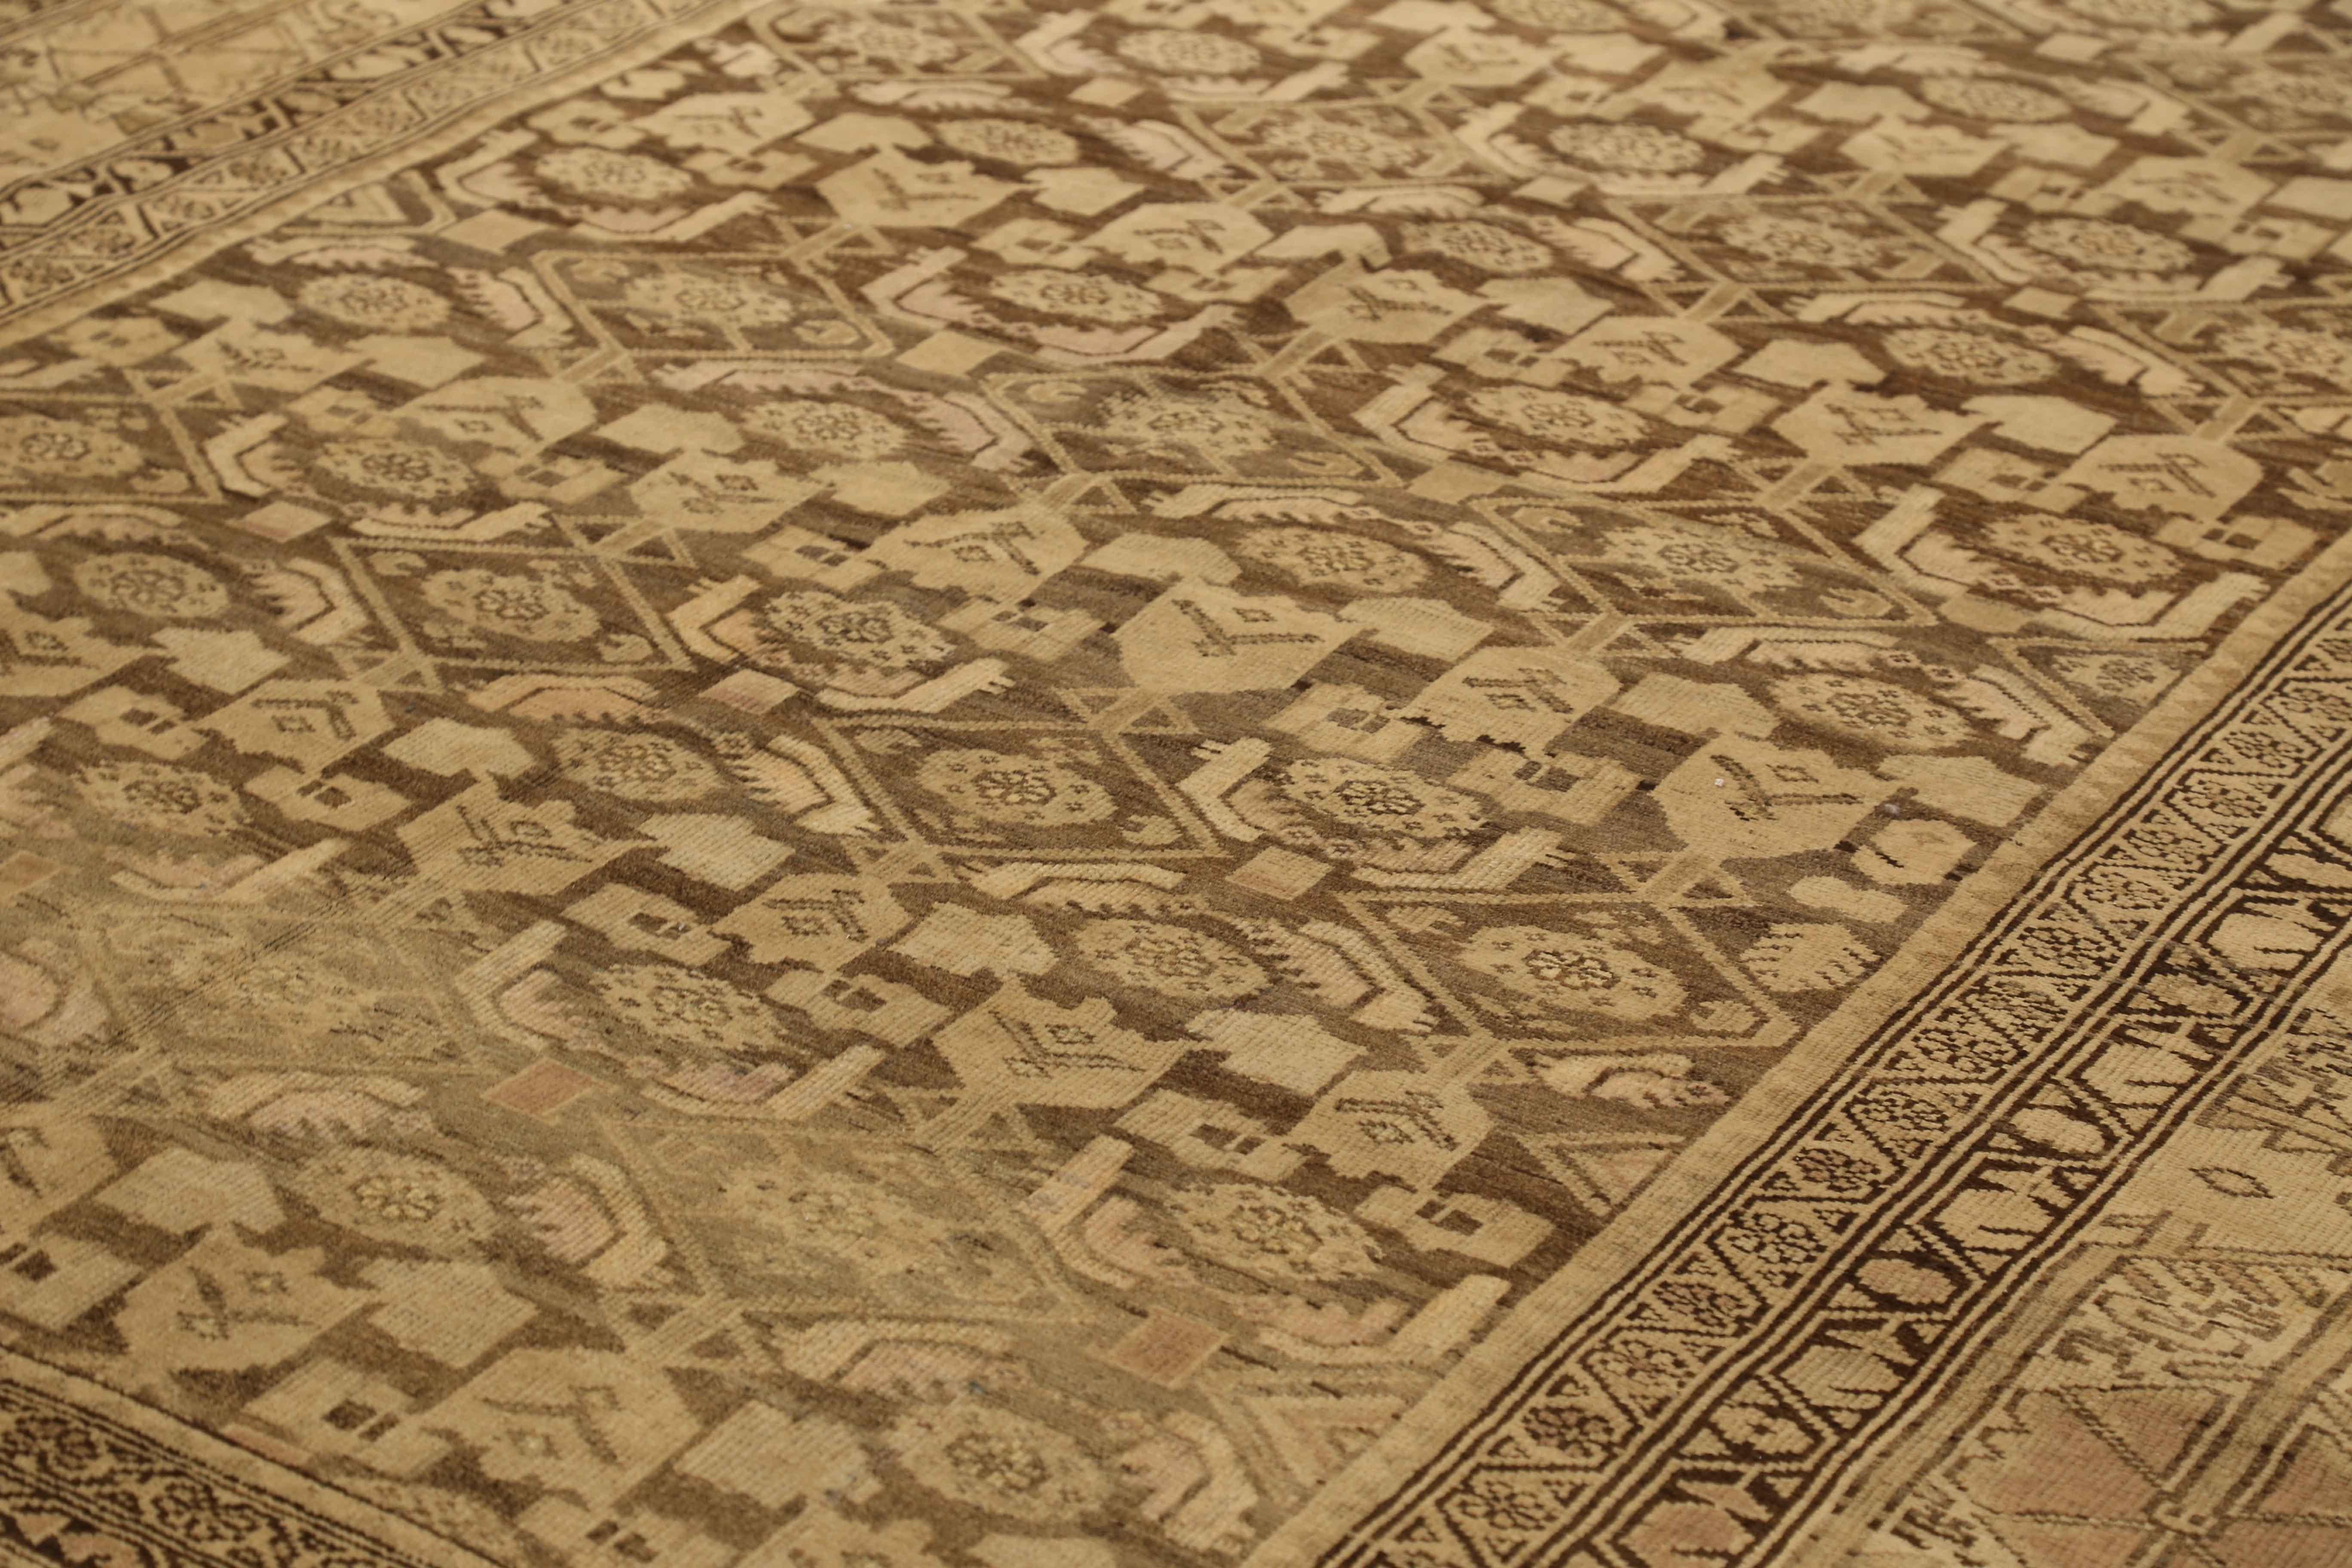 Hand-Knotted Persian Rug Malayer Style with Beige & Brown Design Patterns, circa 1930s For Sale